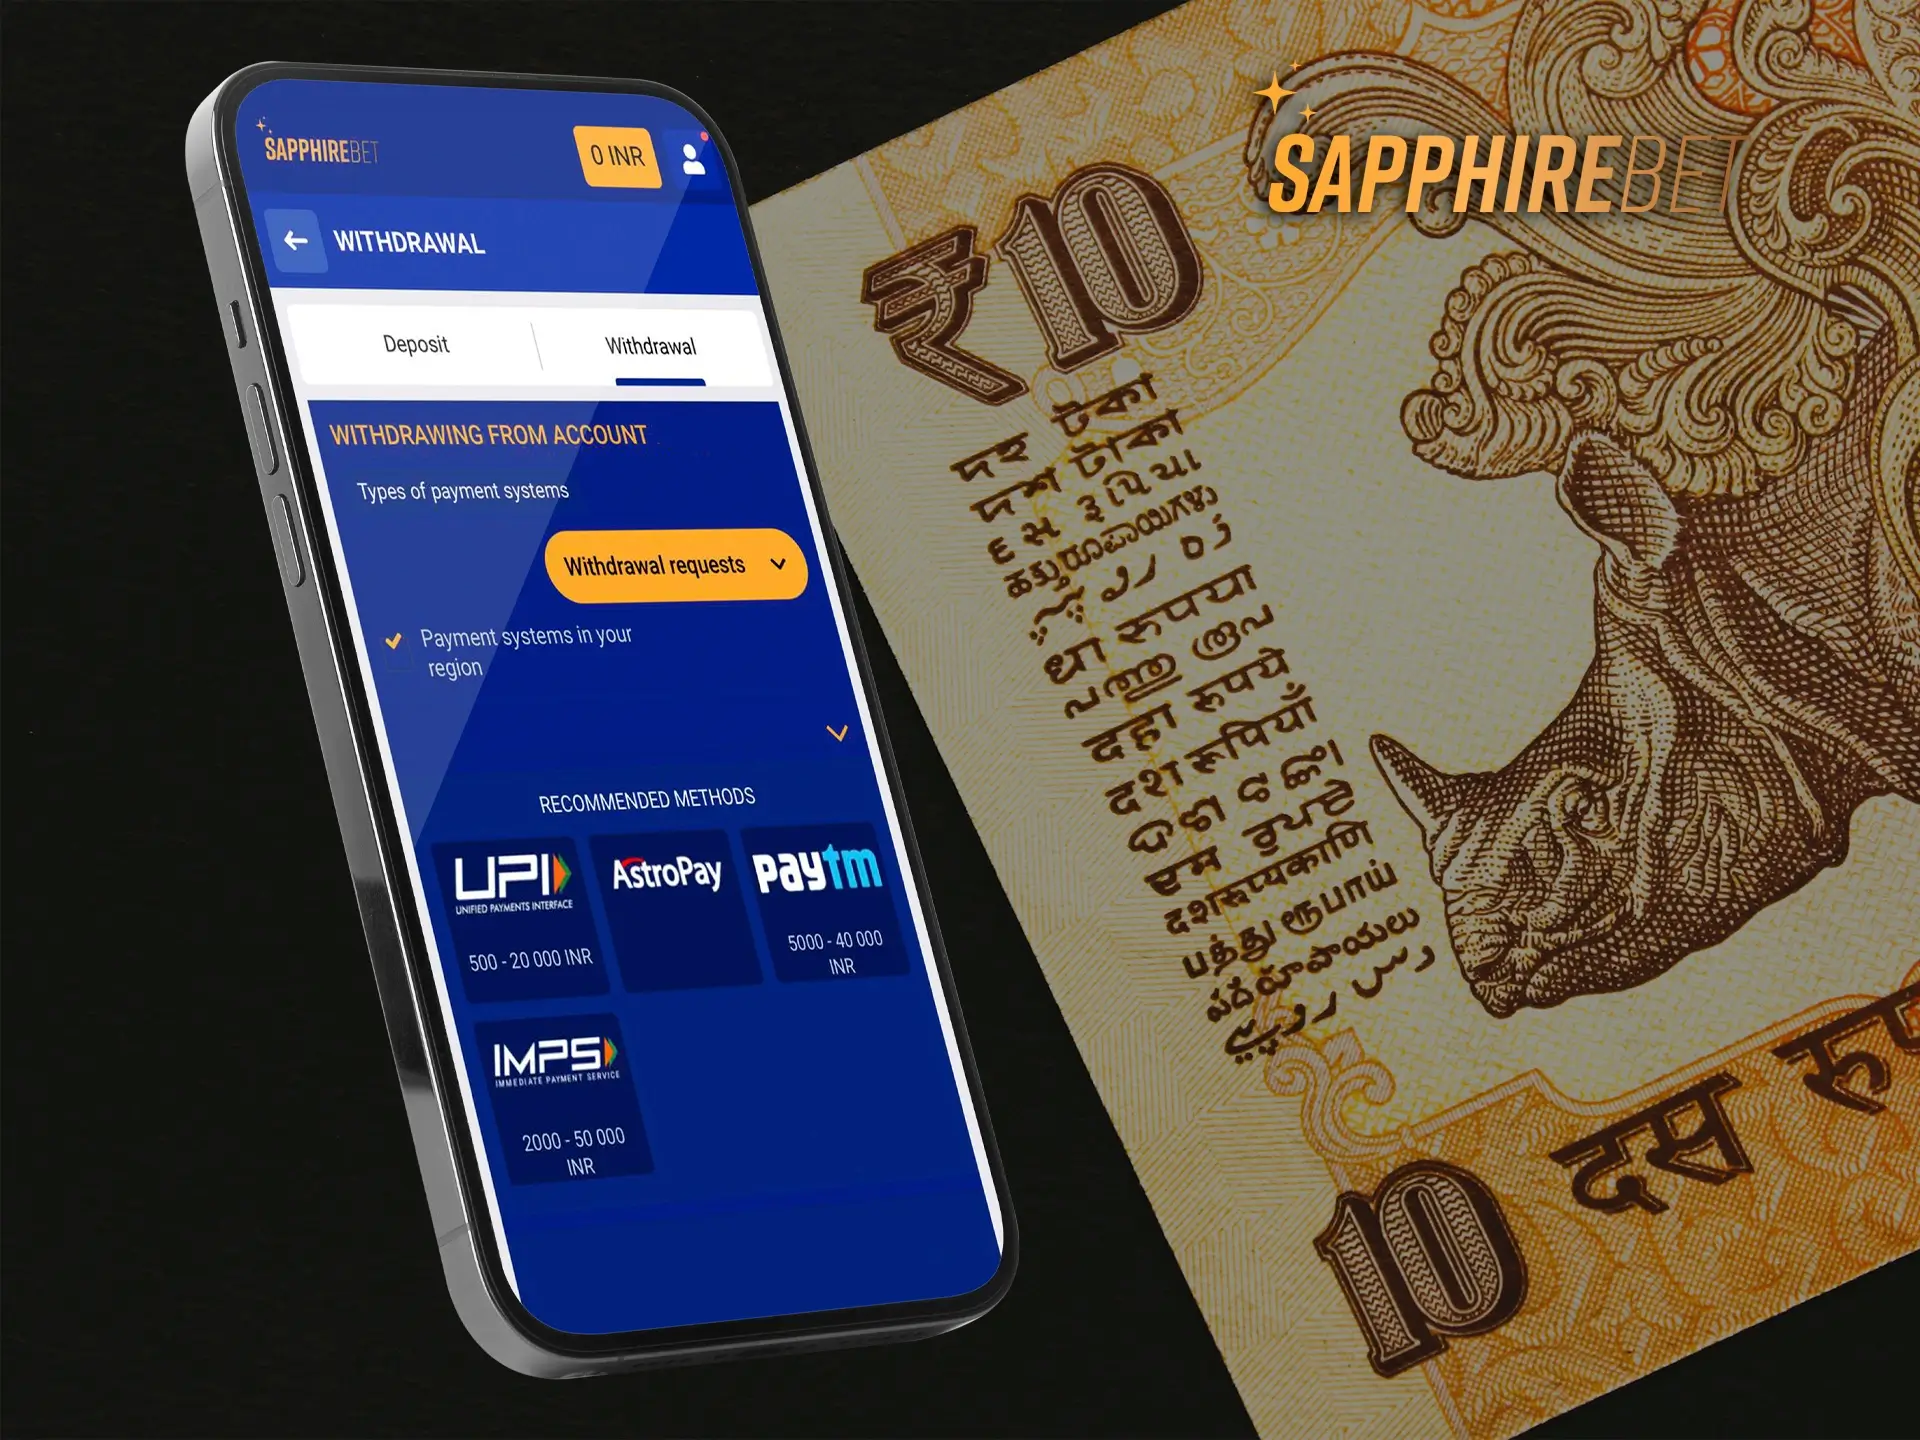 Sapphirebet Casino is always about withdrawal convenience and data security.